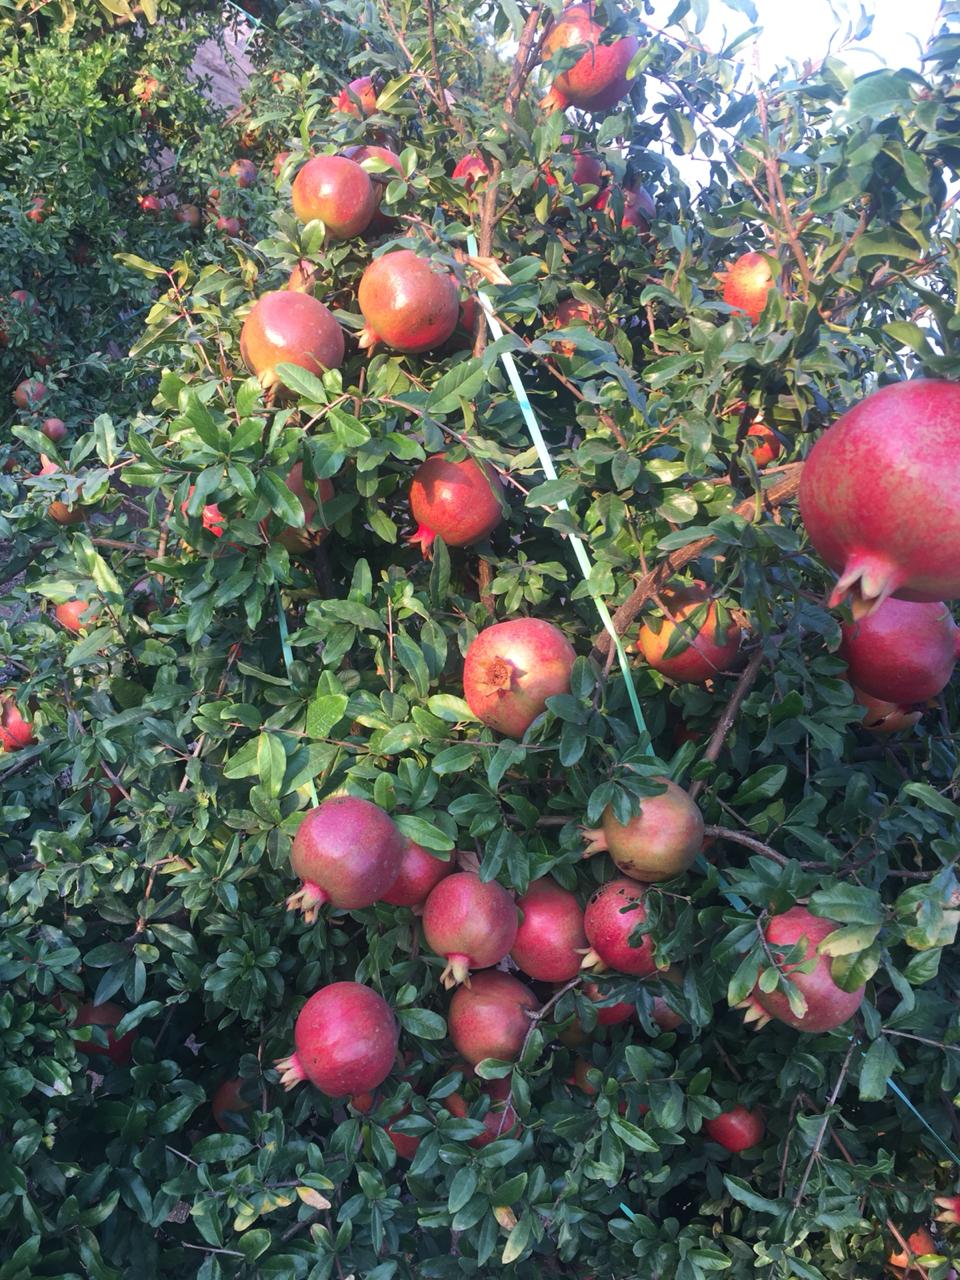 Pomegranate Crop Results